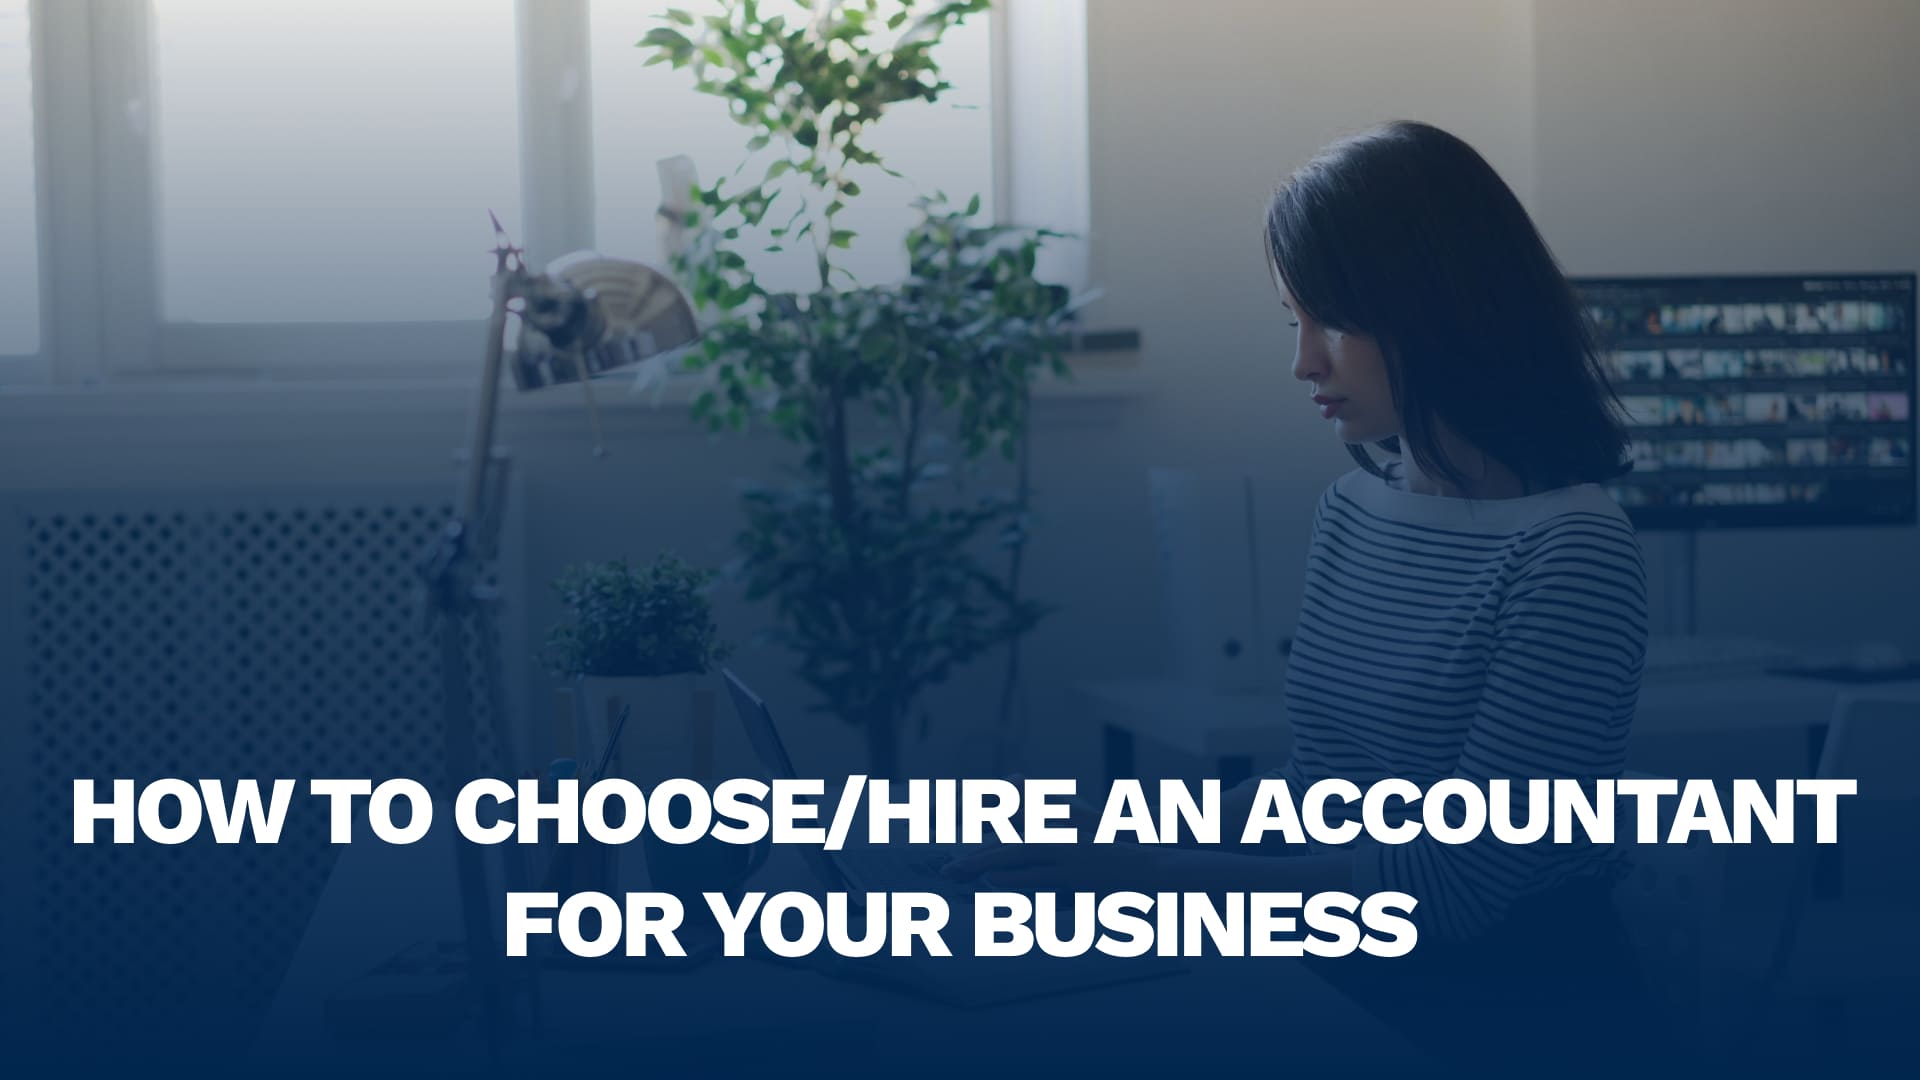 How to Choose/Hire an Accountant for Your Business